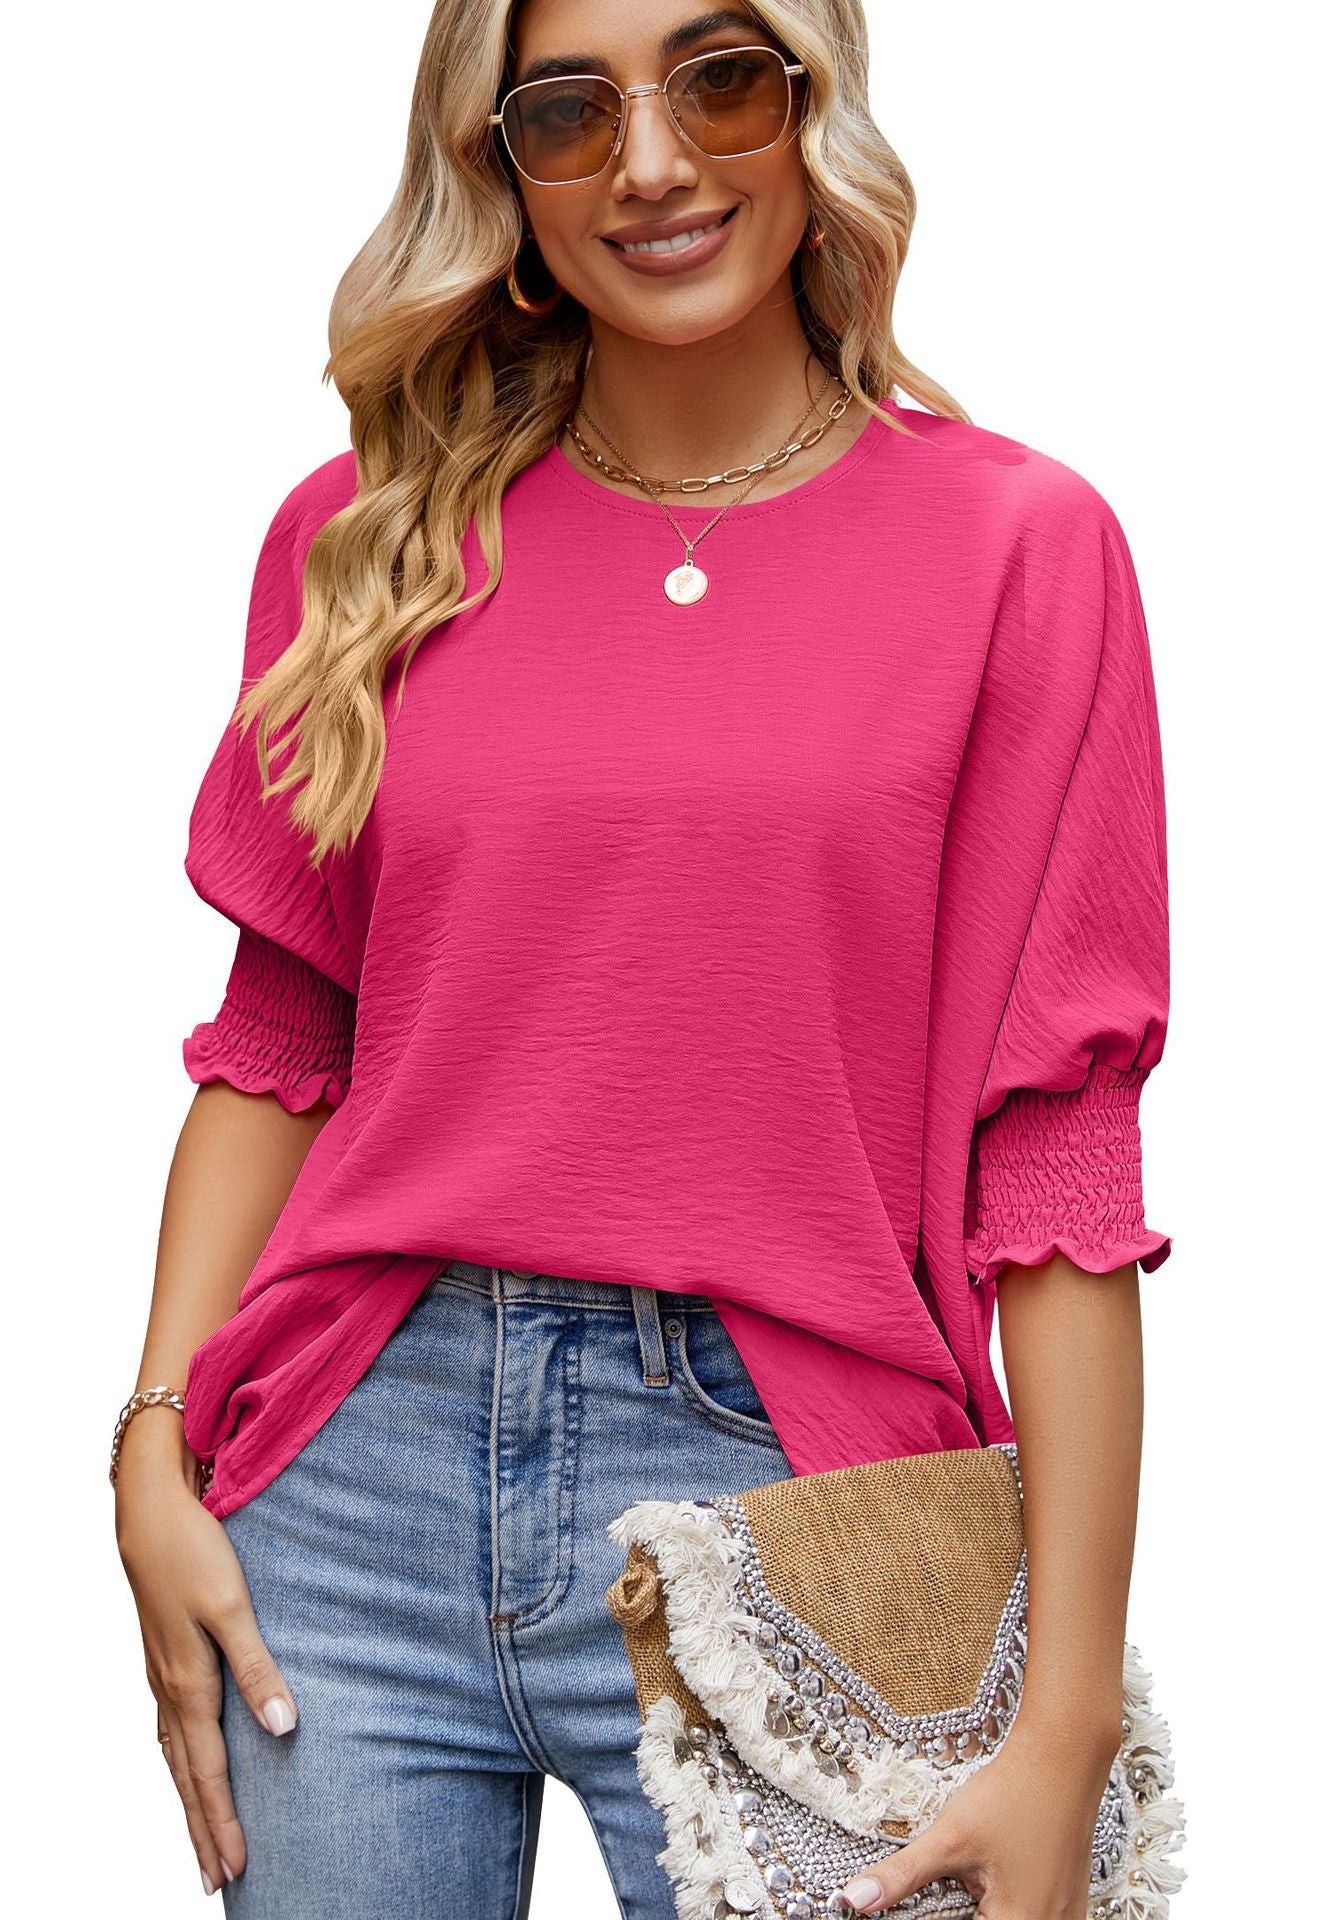 Tops  | Women's Loose T-shirt With Elastic Sleeves Solid Color Outfit Fashion Tops Clothes | Rose Red |  L| thecurvestory.myshopify.com